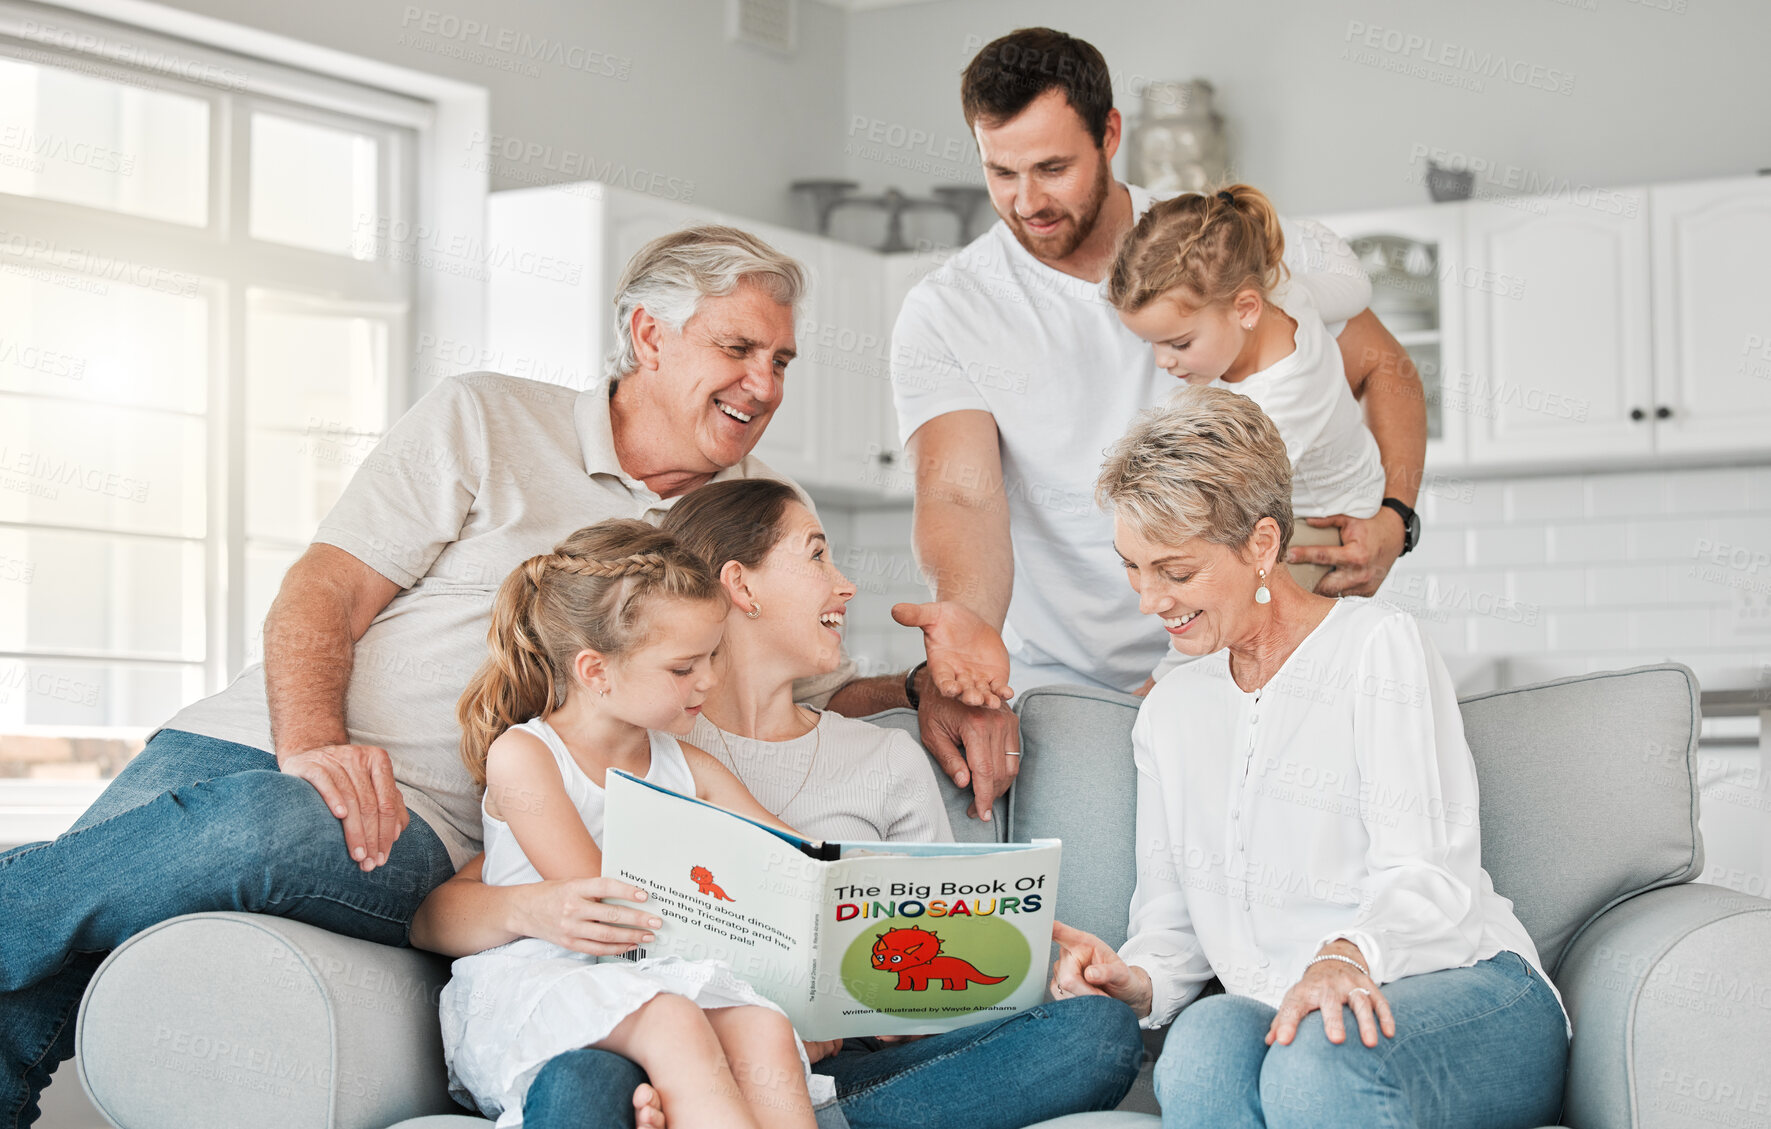 Buy stock photo Shot of a family reading a story book together at home